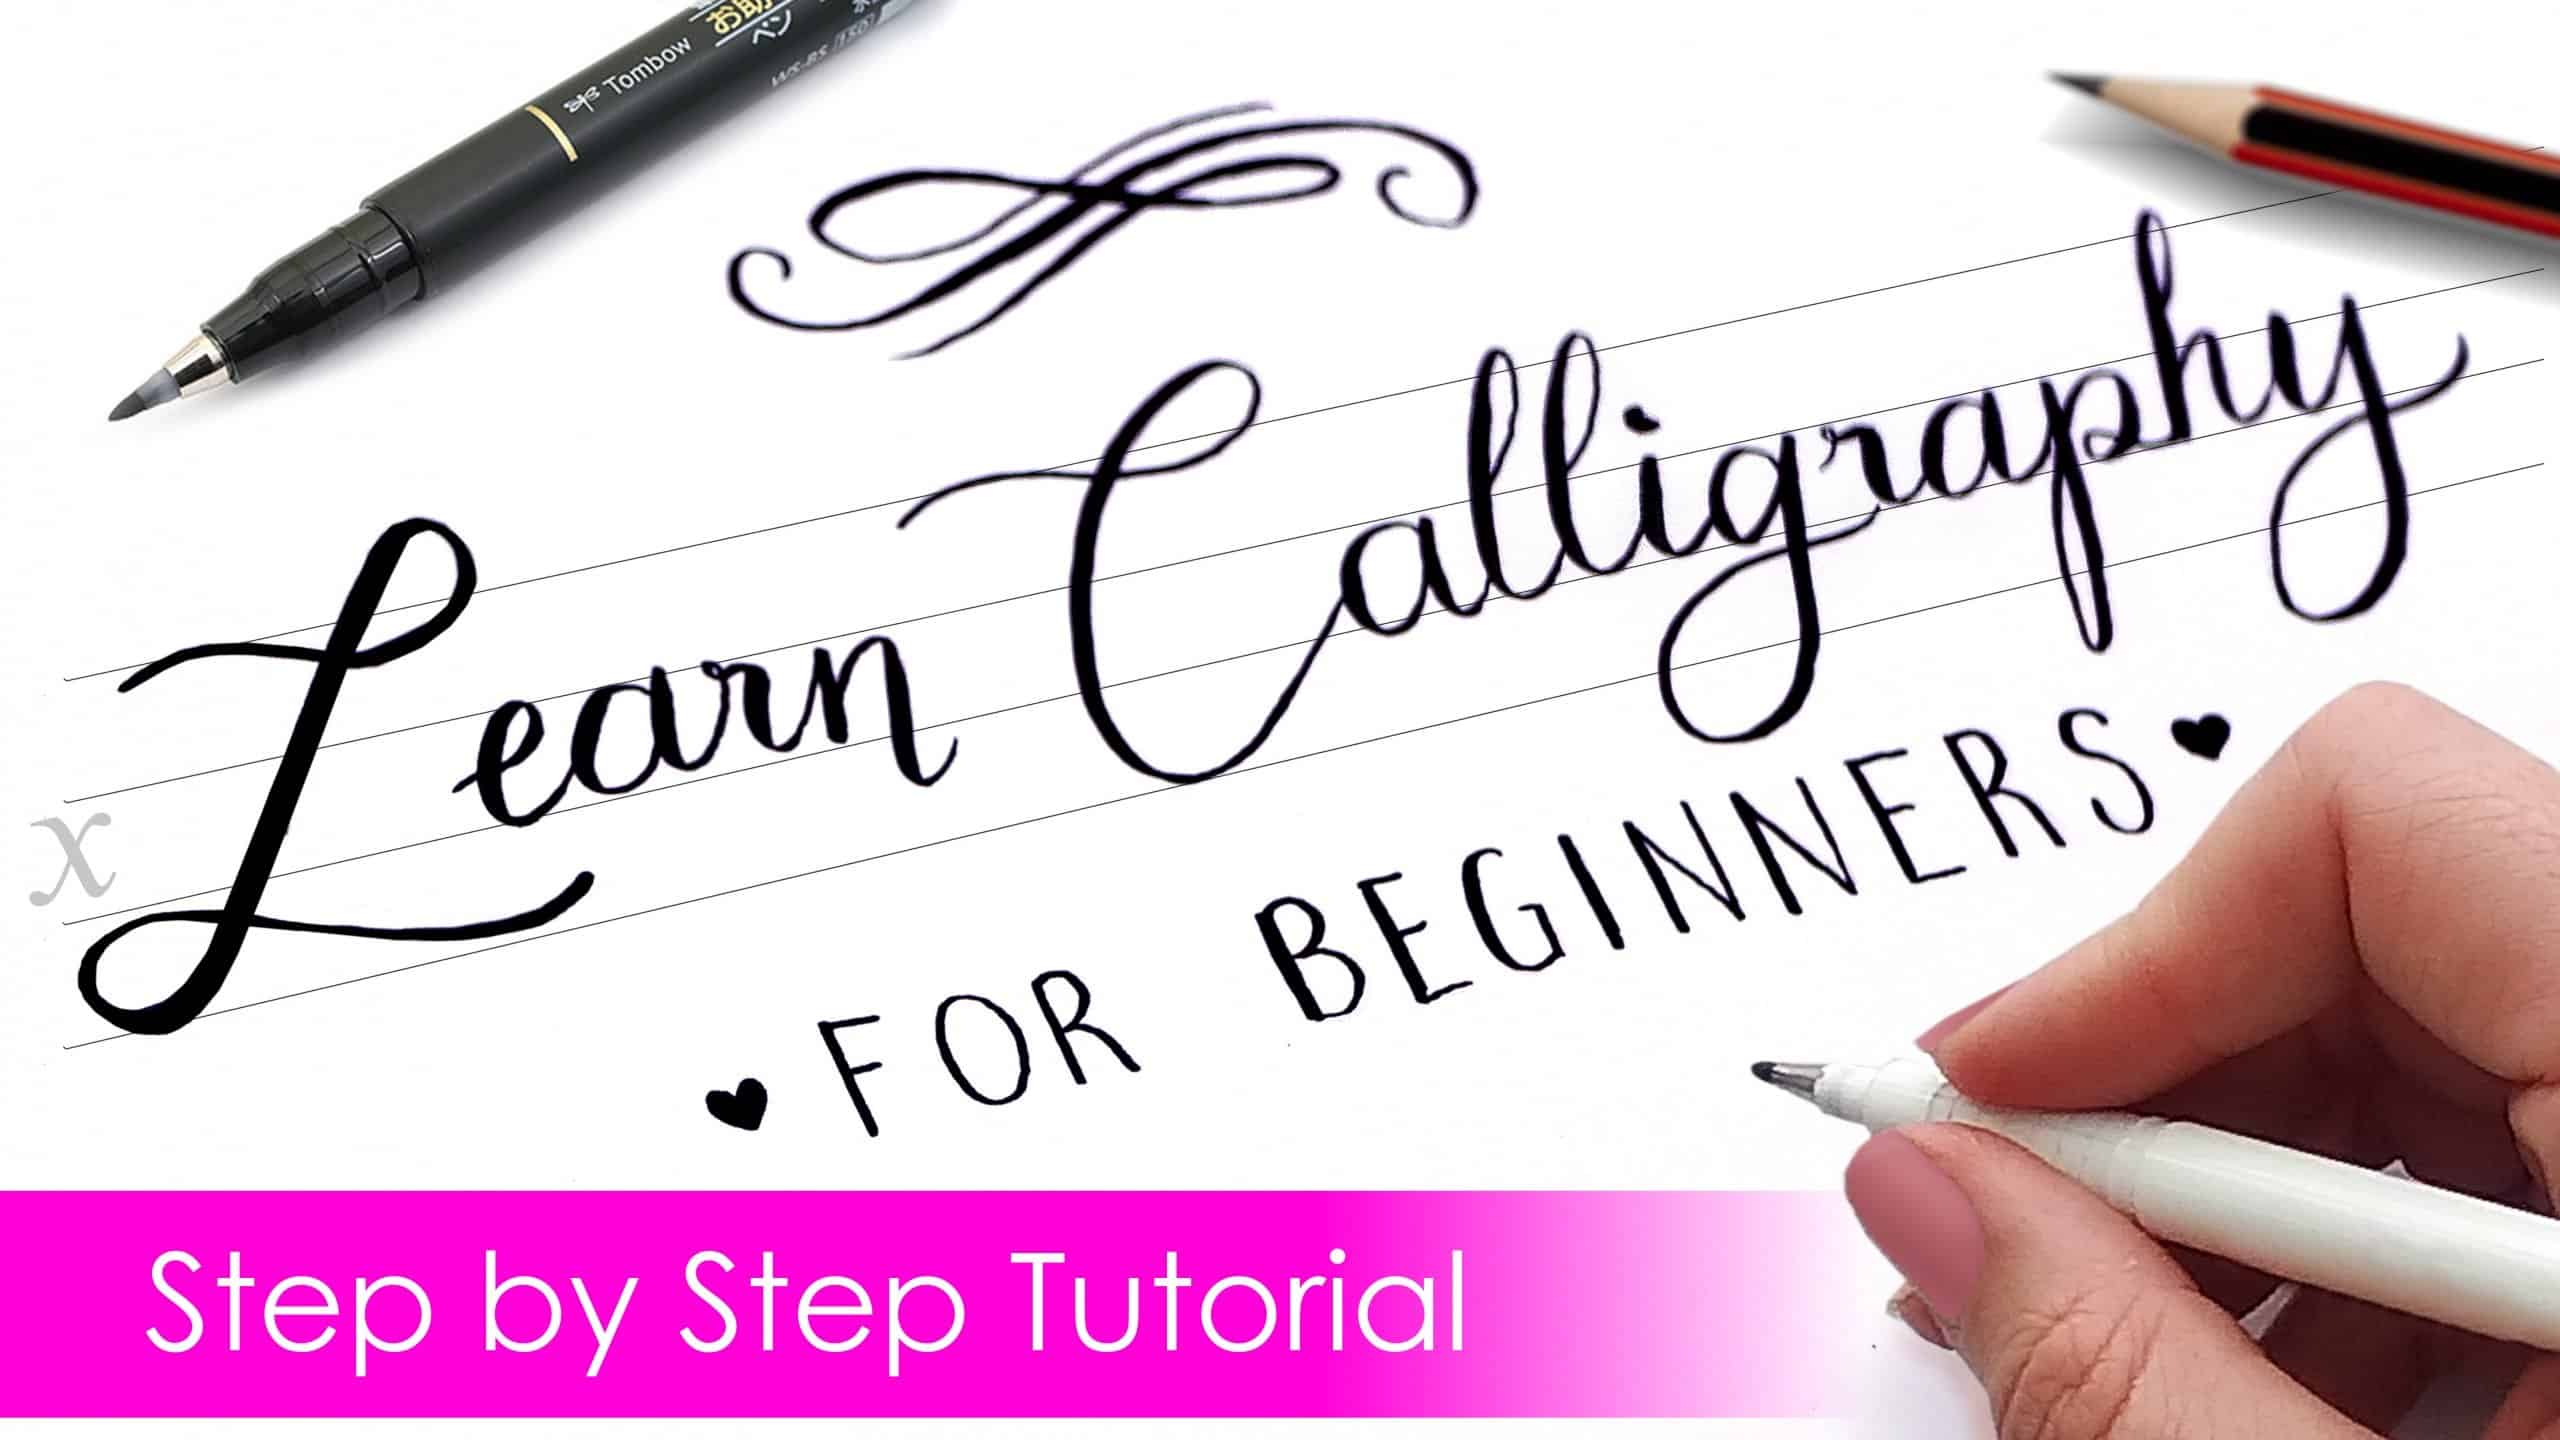 calligraphy-for-beginners-tutorial-with-any-pen-in-step-by-step-how-to